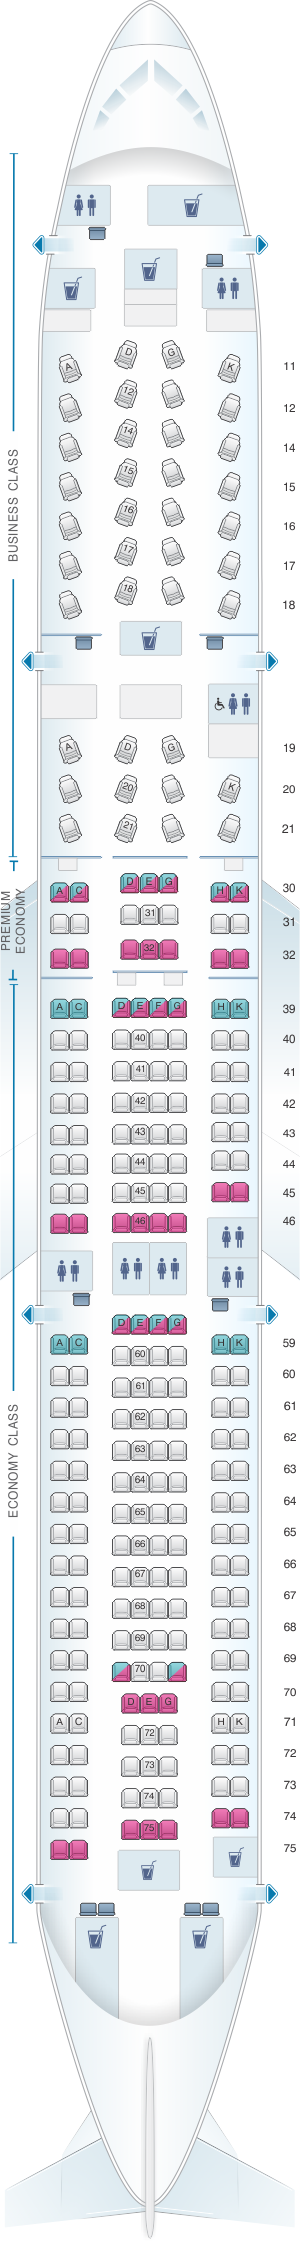 Seat map for Cathay Pacific Airways Airbus A330 300 (33K)